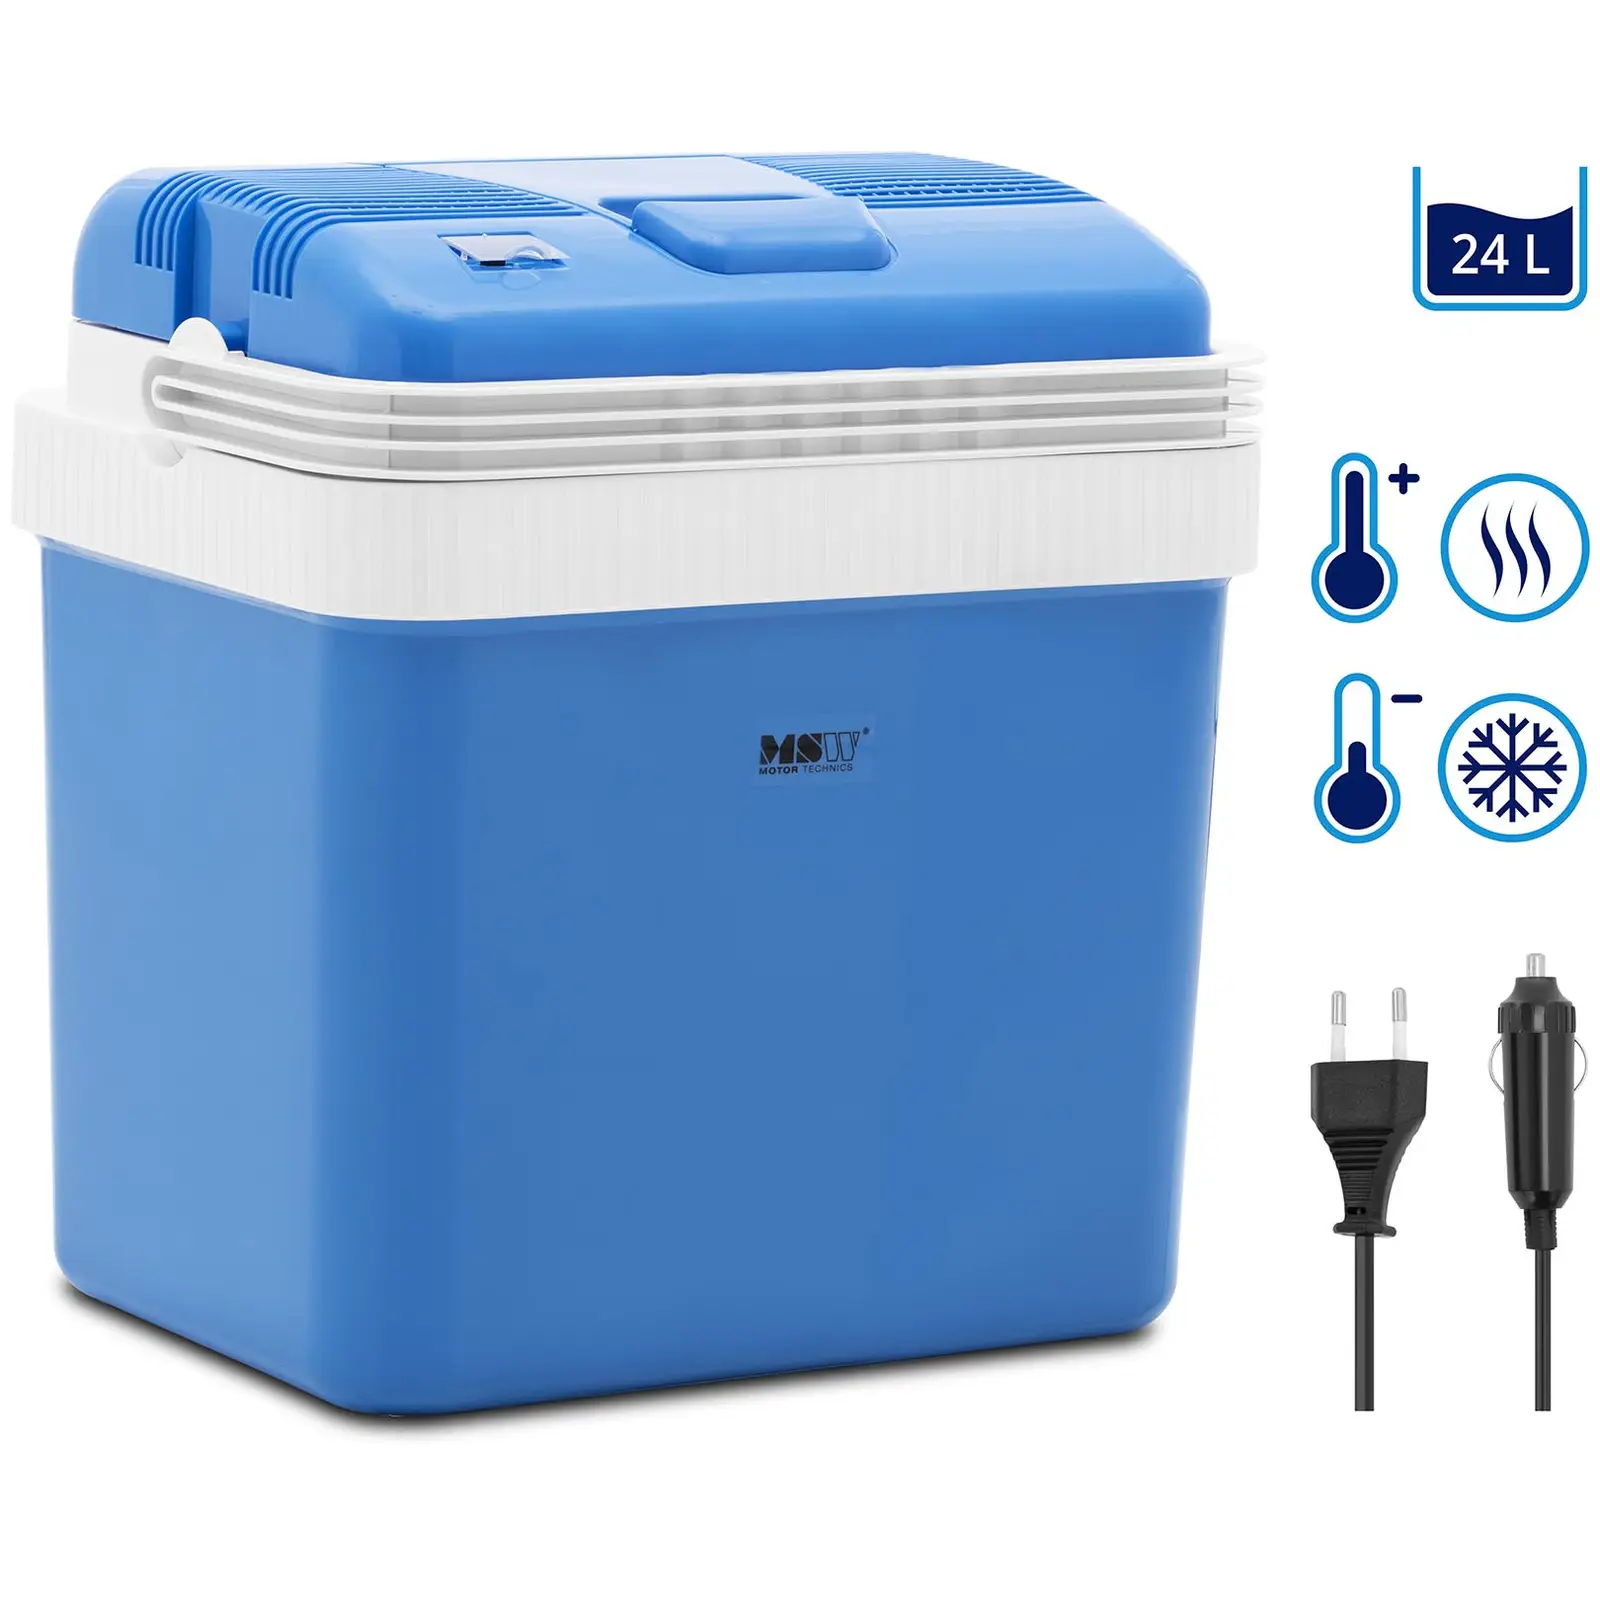 Electric cooler 12 V / 230 V - 2-in-1 appliance with keep-warm function - 24 L